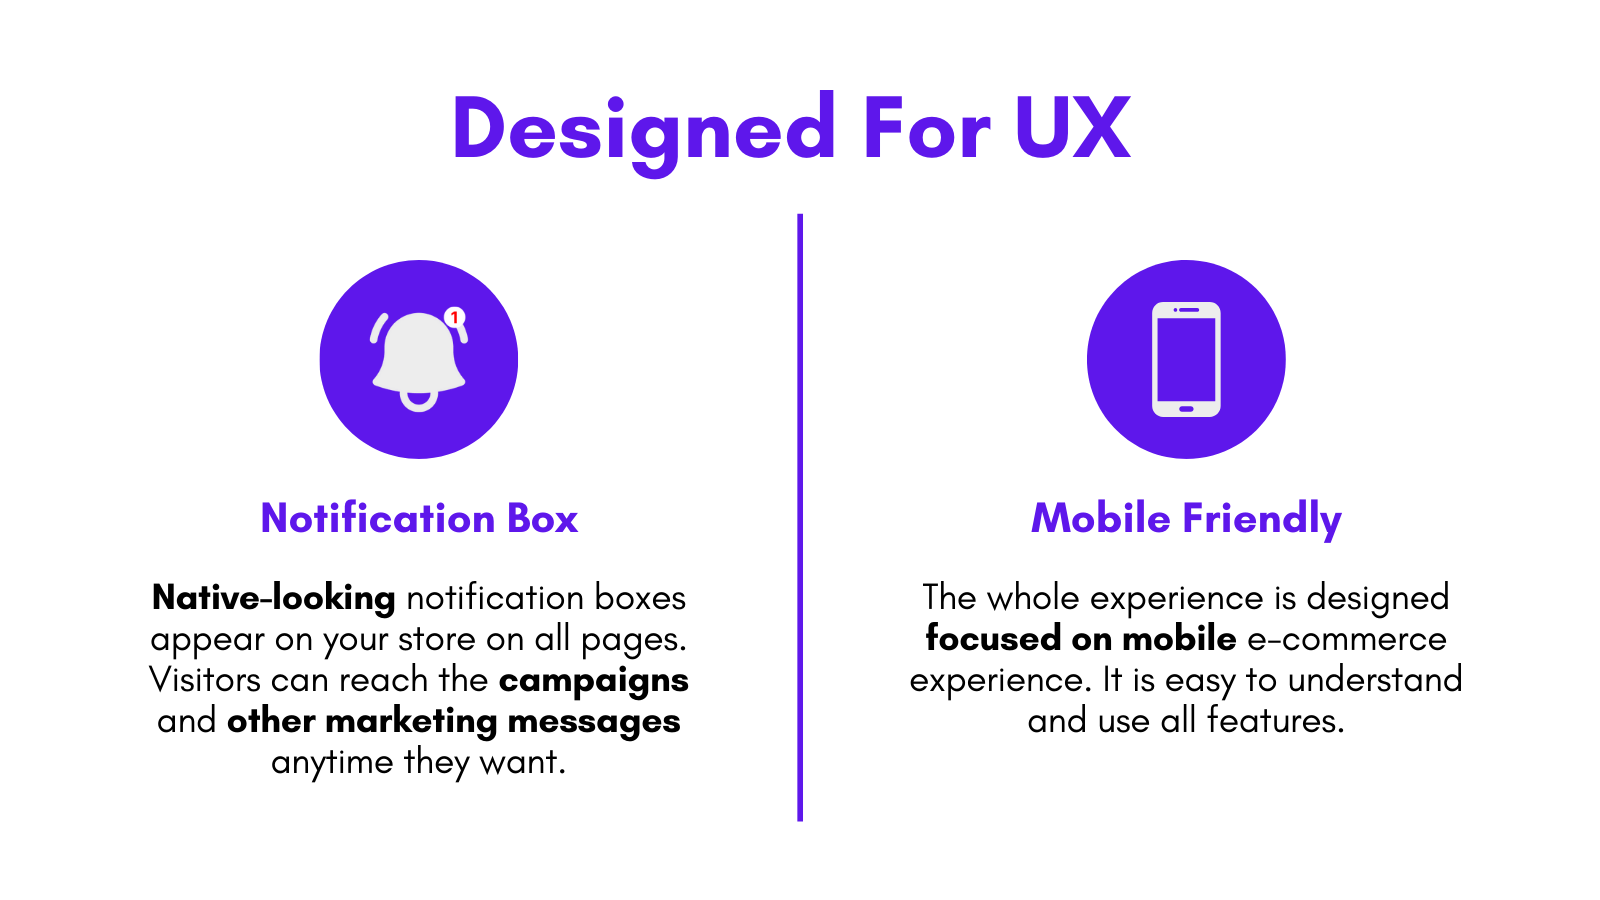 UX Friendly Time-Limited Discounts to Create Urgency